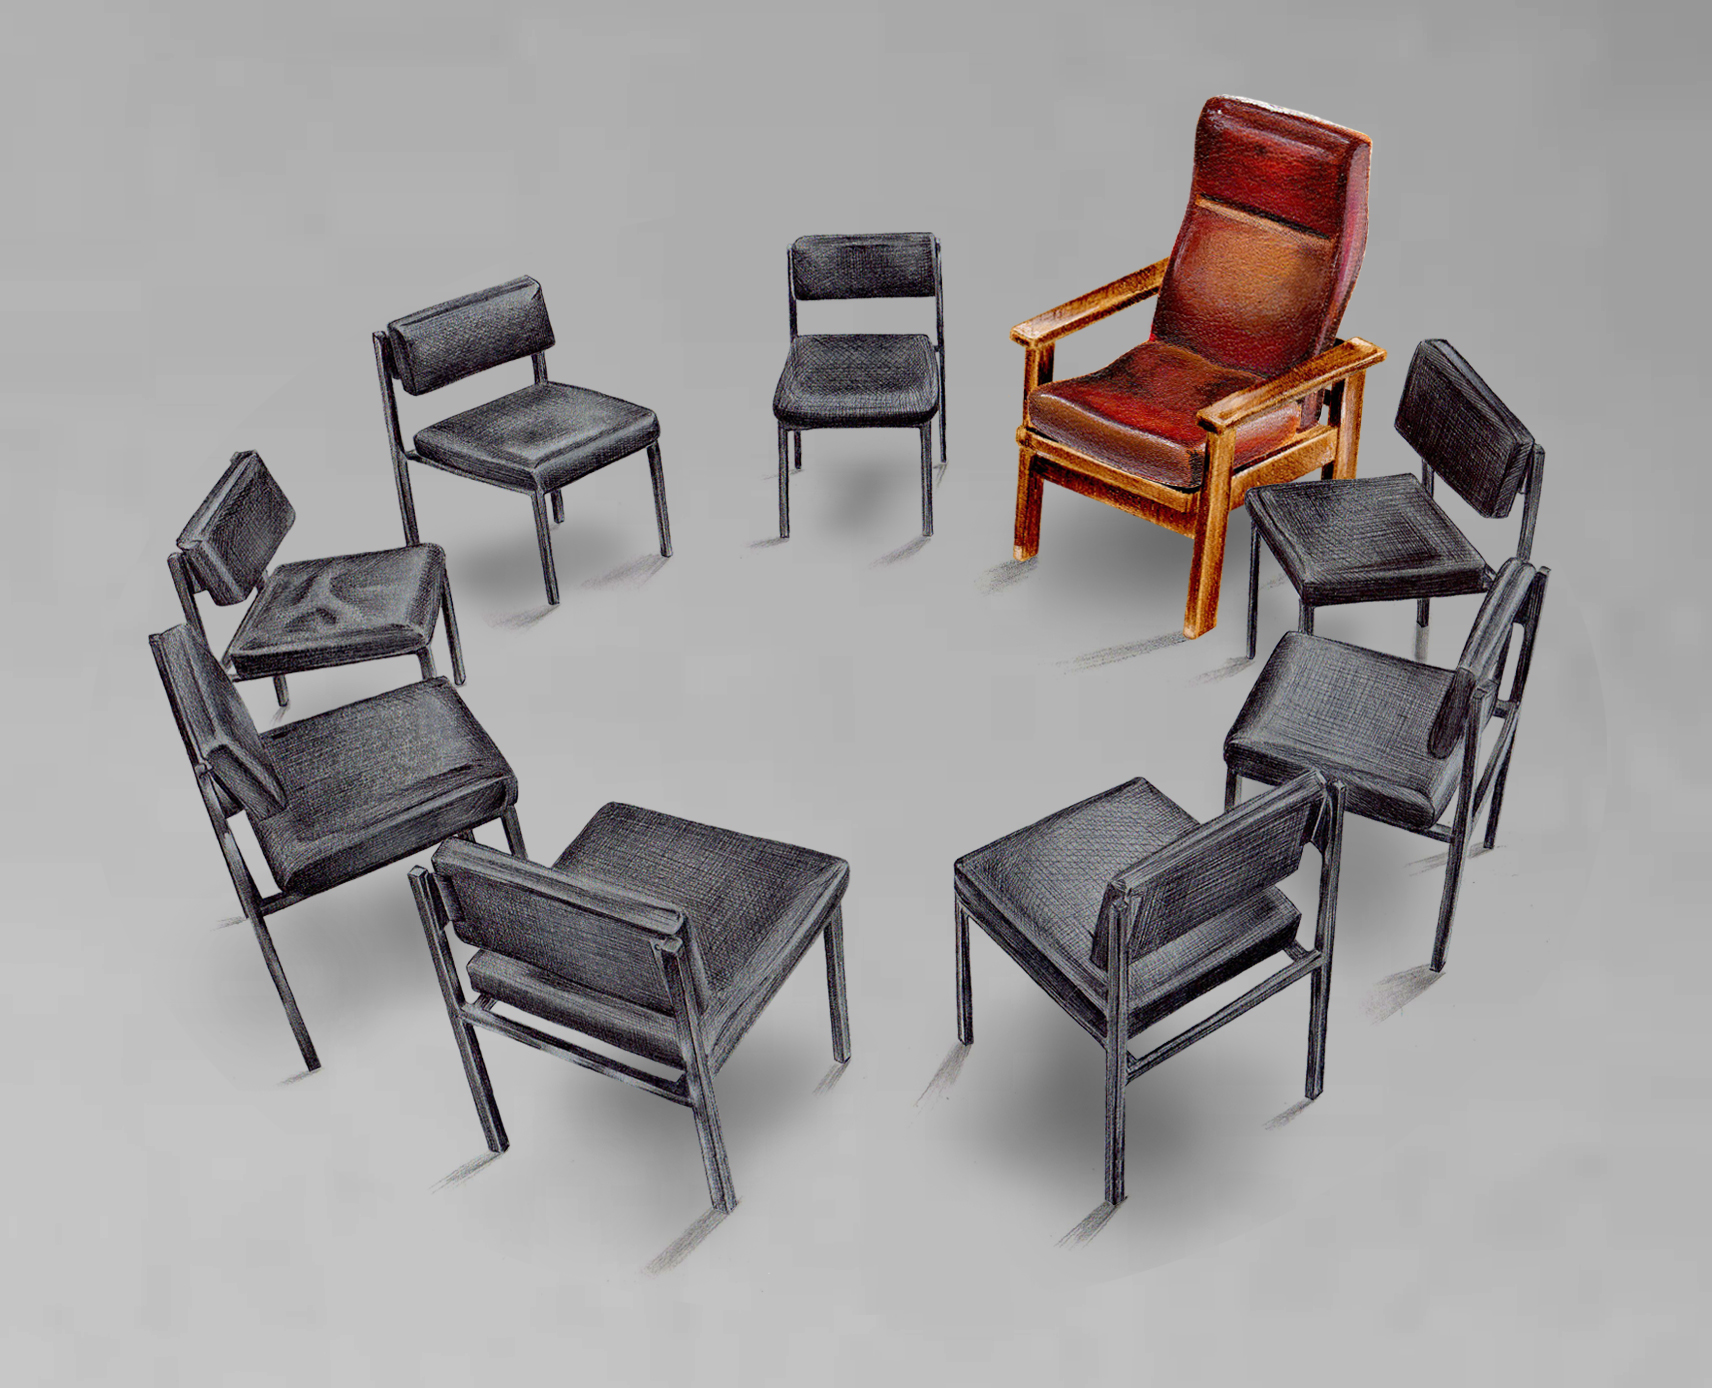 One Flew Over the Cuckoo’s Nest, by Carrie Francis, consisting of black chairs and one larger, brown chair in a circle  